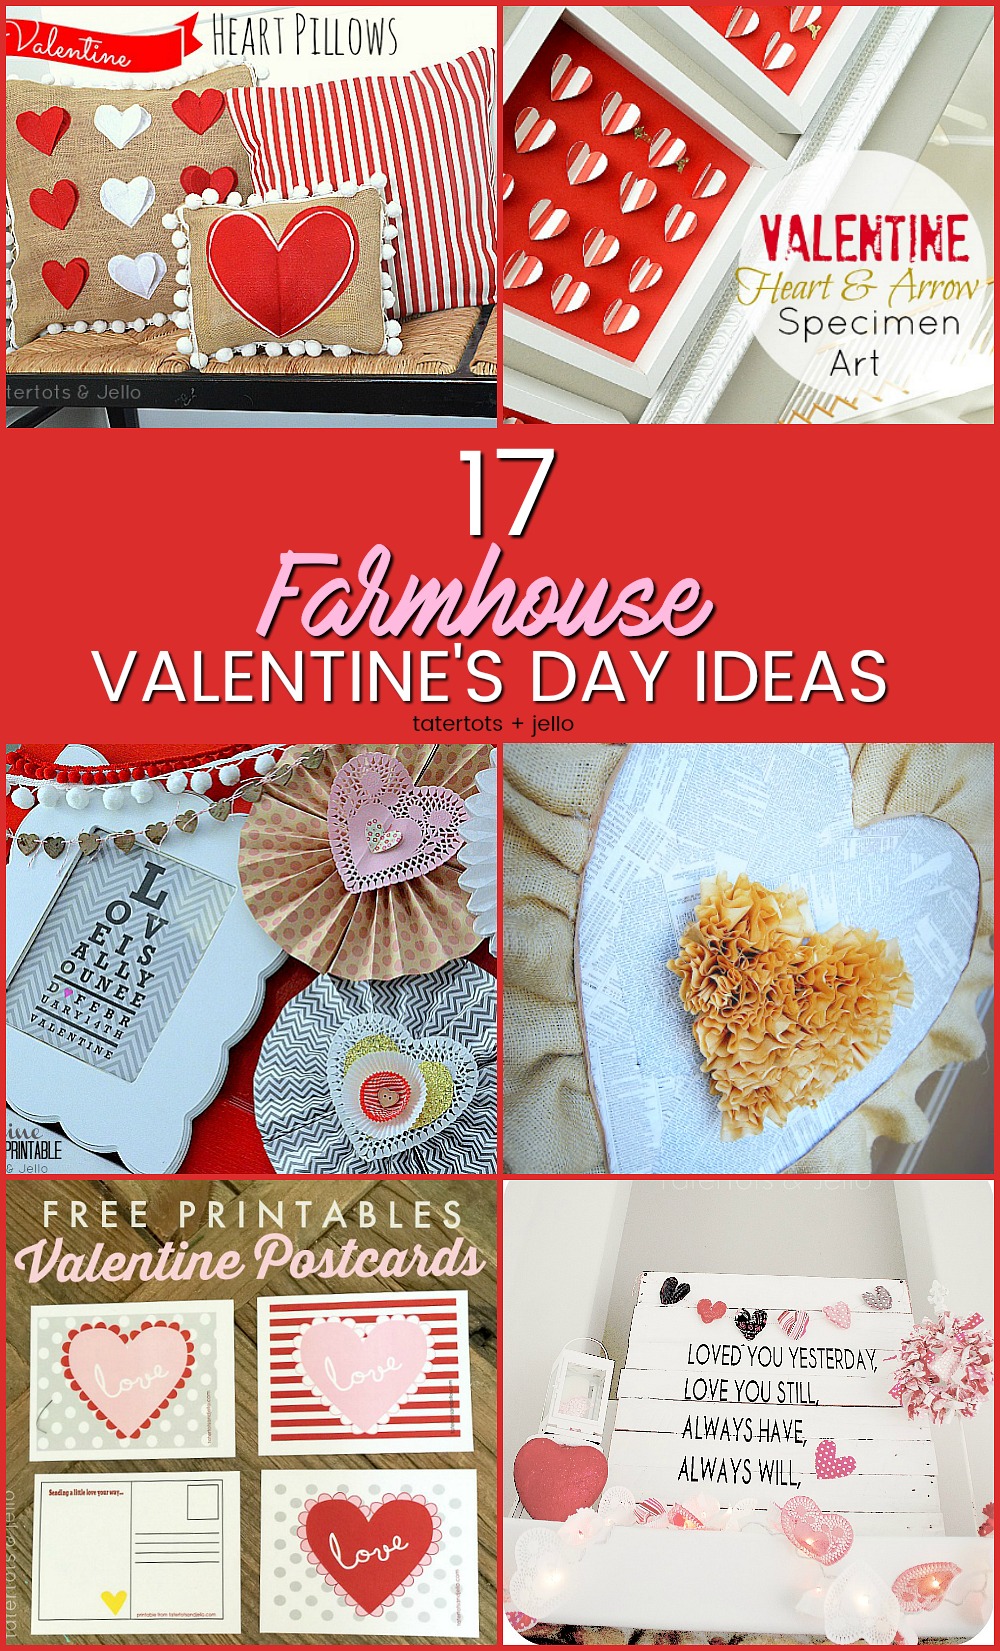 Simple Valentine's Day Gift Ideas with Free Typewriter Printable Sayings. Create easy gifts or party favors with three main ingredients -- paper, ribbon and washi tape. Fill with treats and give these simple gifts for Valentine's Day this year!